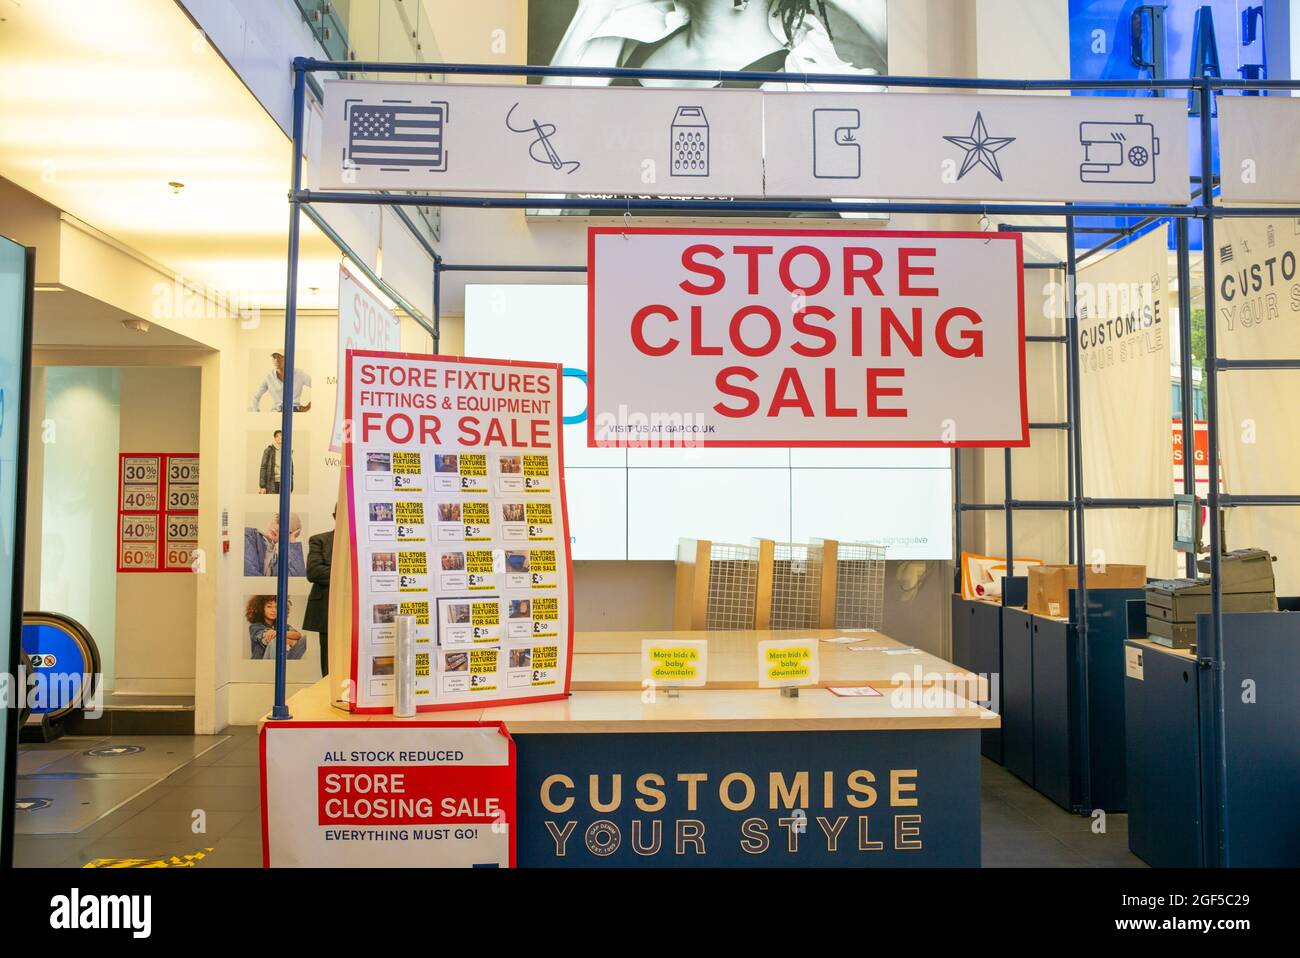 Store Closing Sale signs showing fixtures and fittings for sale at GAP London Oxford Street Flagship Store near to Bond Street - 17 August 2021 Stock Photo